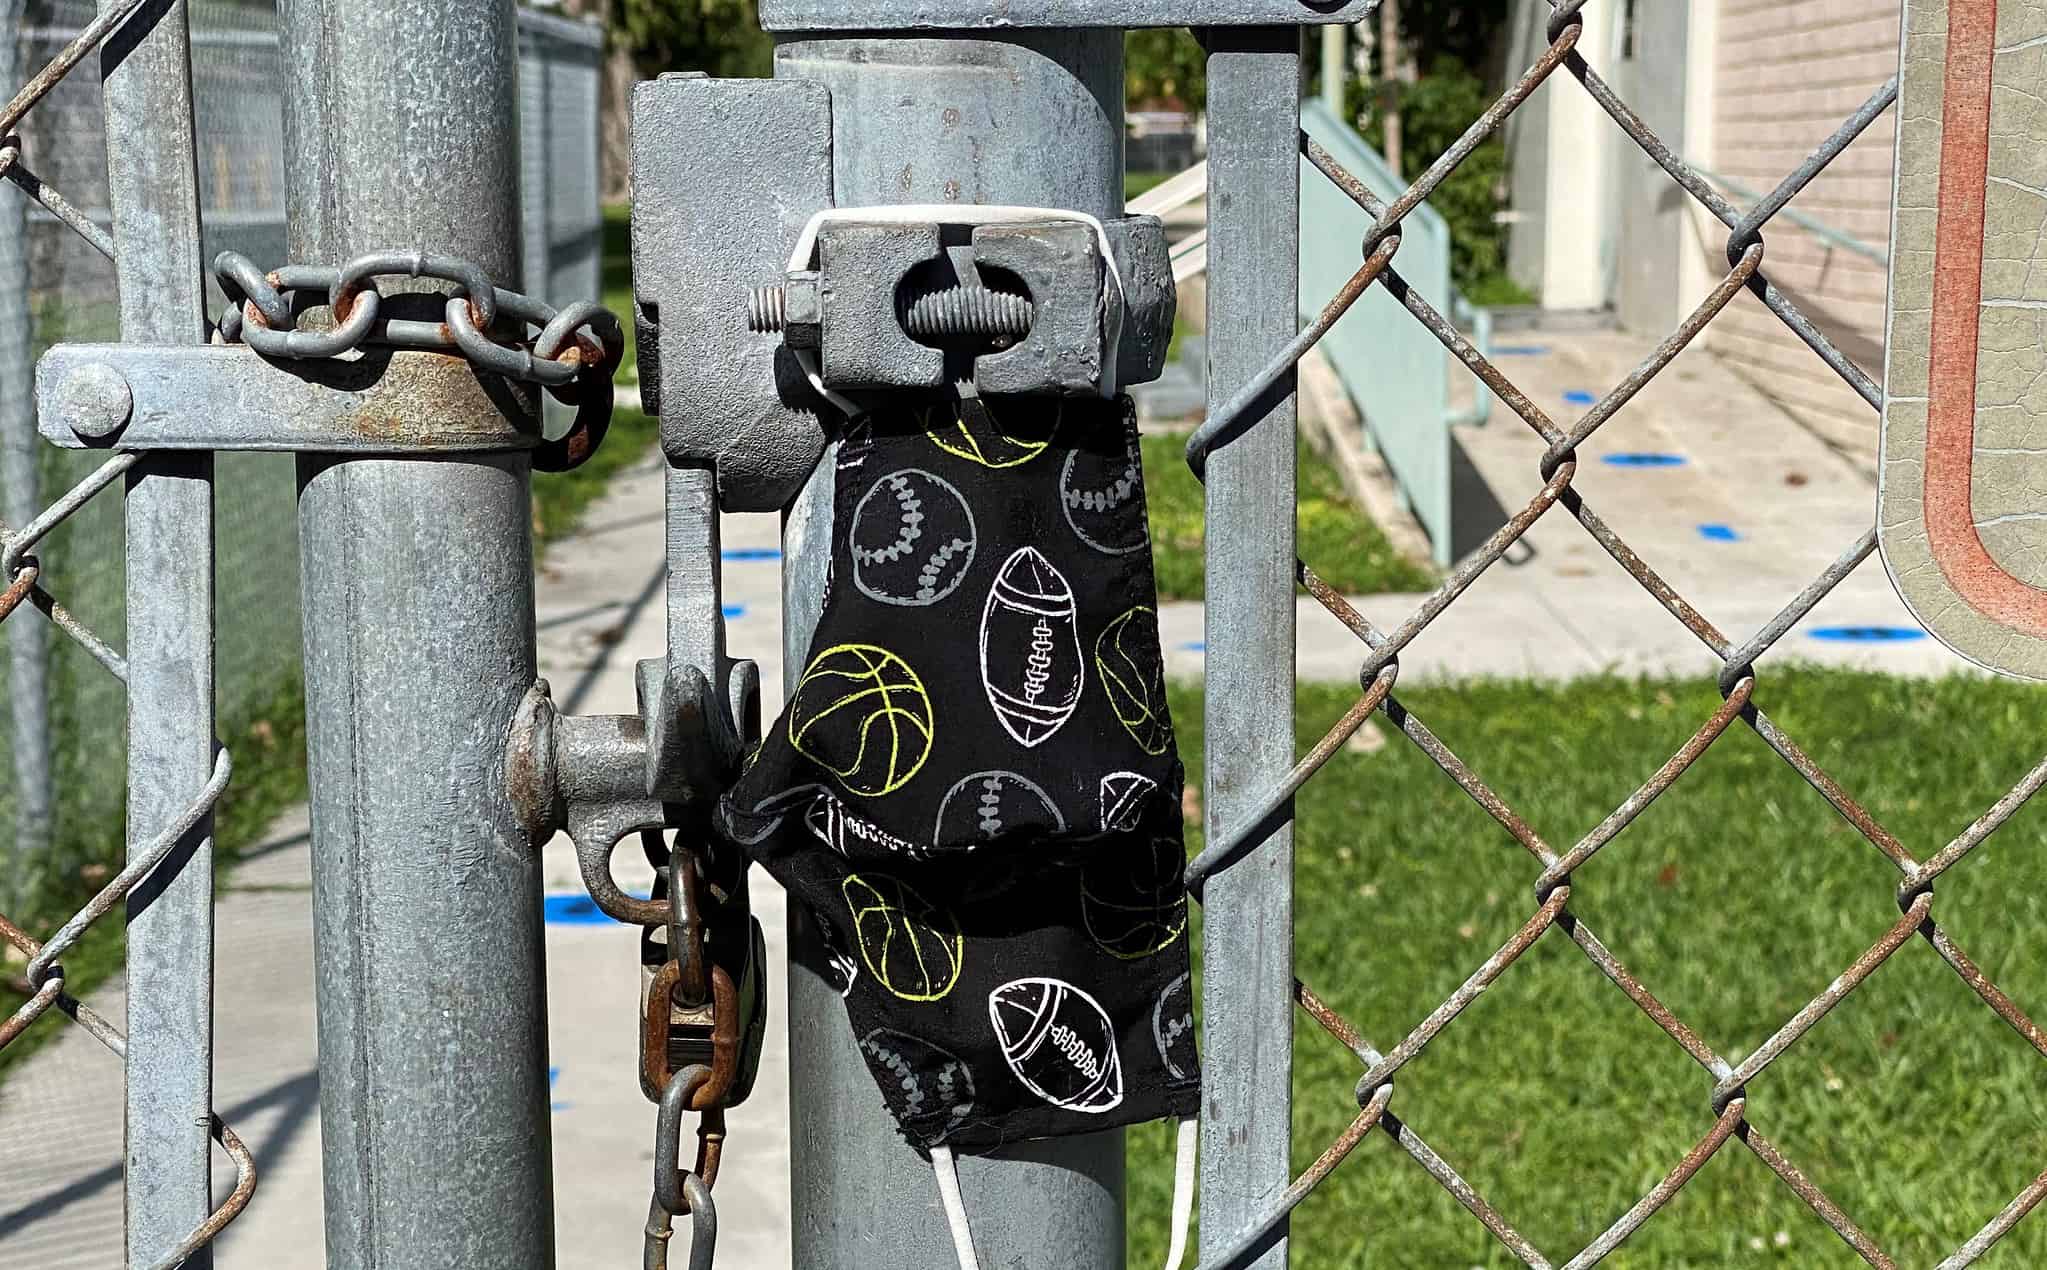 School gates locked with childs face mask